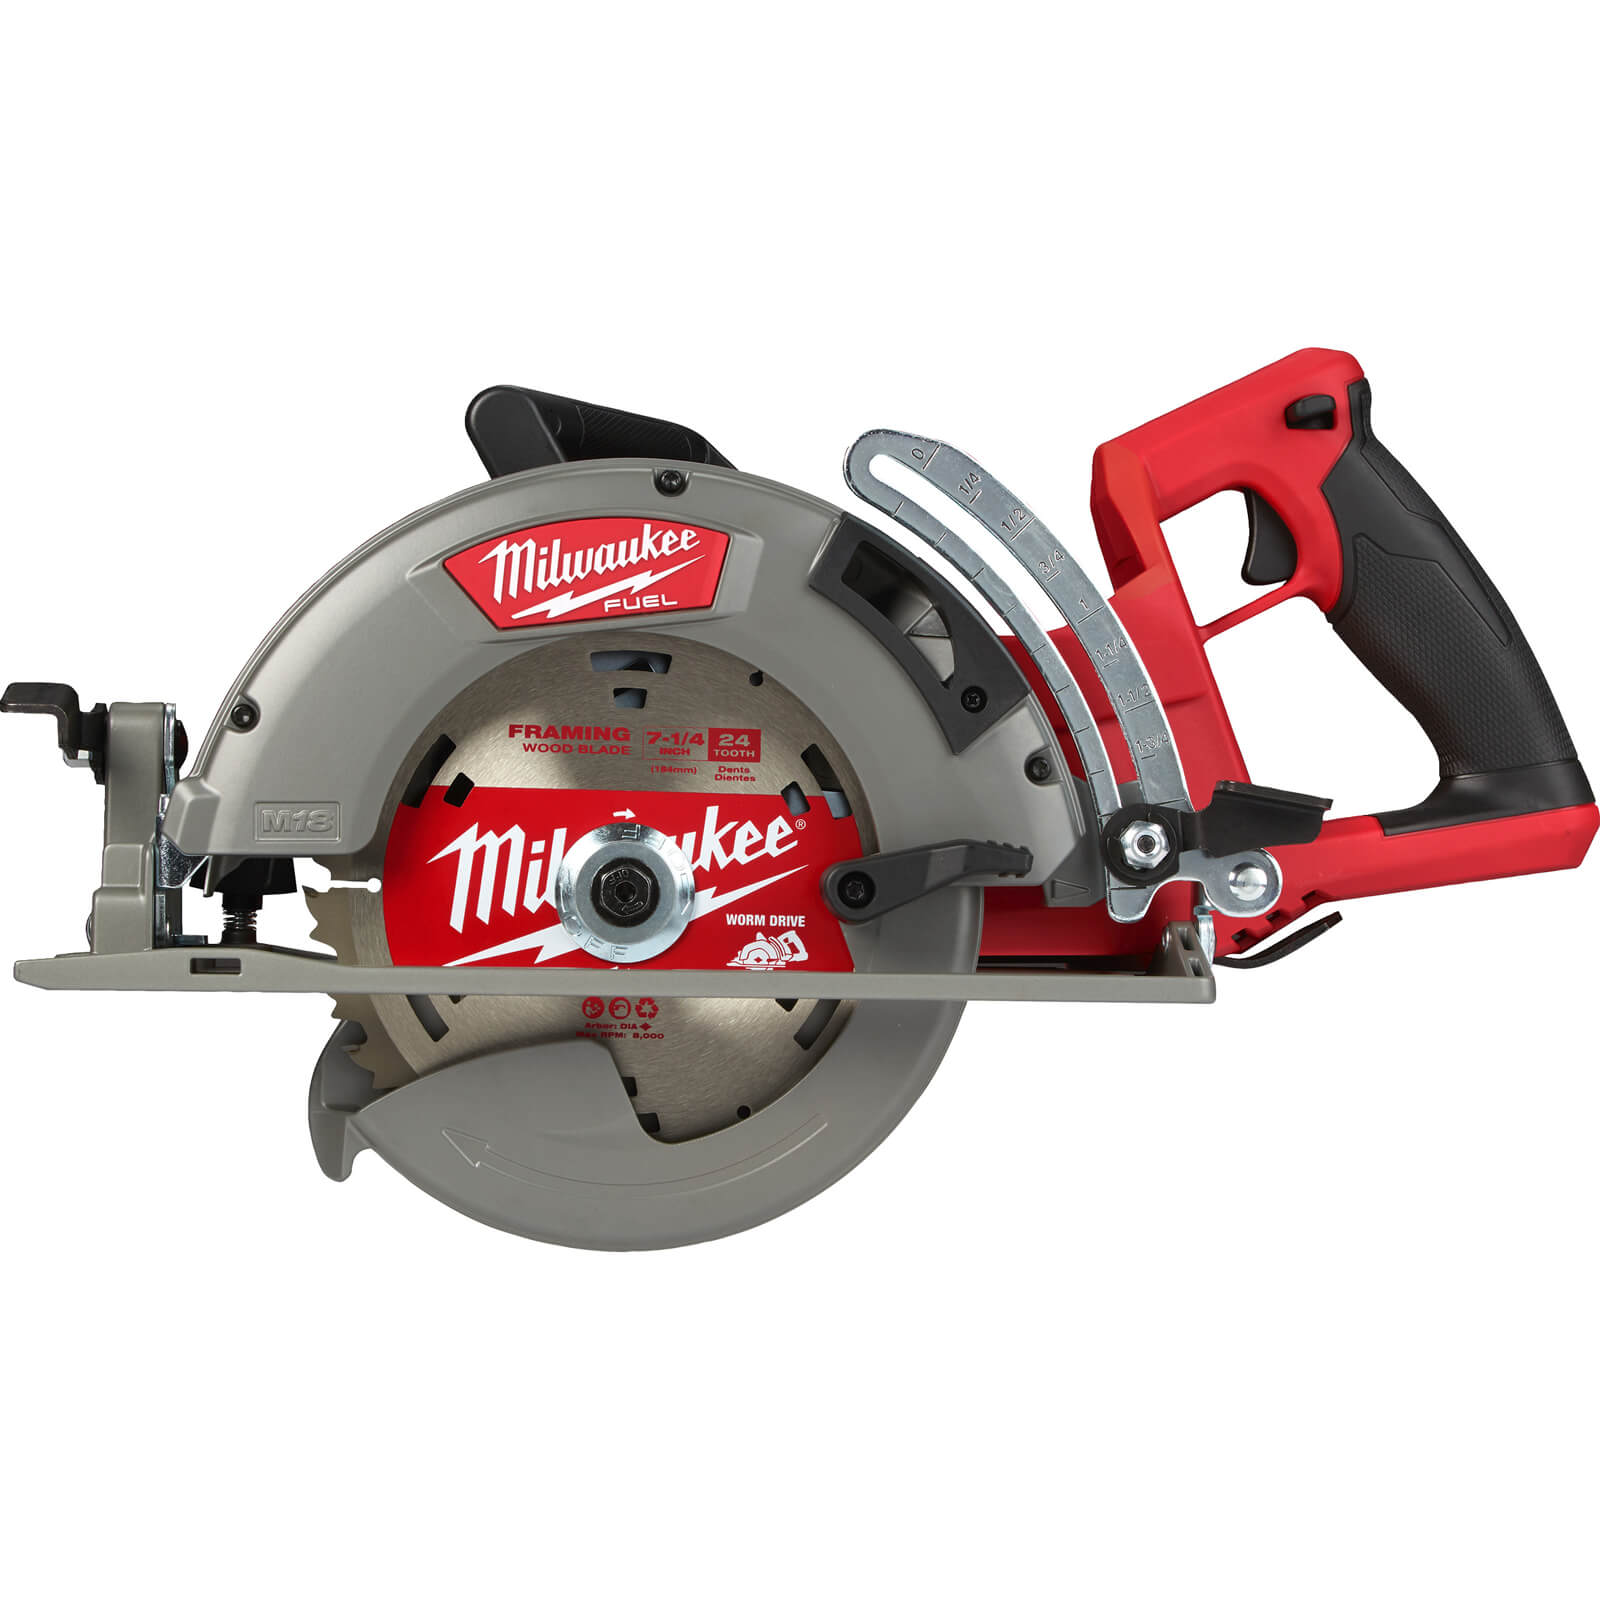 Image of Milwaukee M18 FCSRH66 Fuel 18v Cordless Brushless Rear Handle Circular Saw 190mm No Batteries No Charger No Case